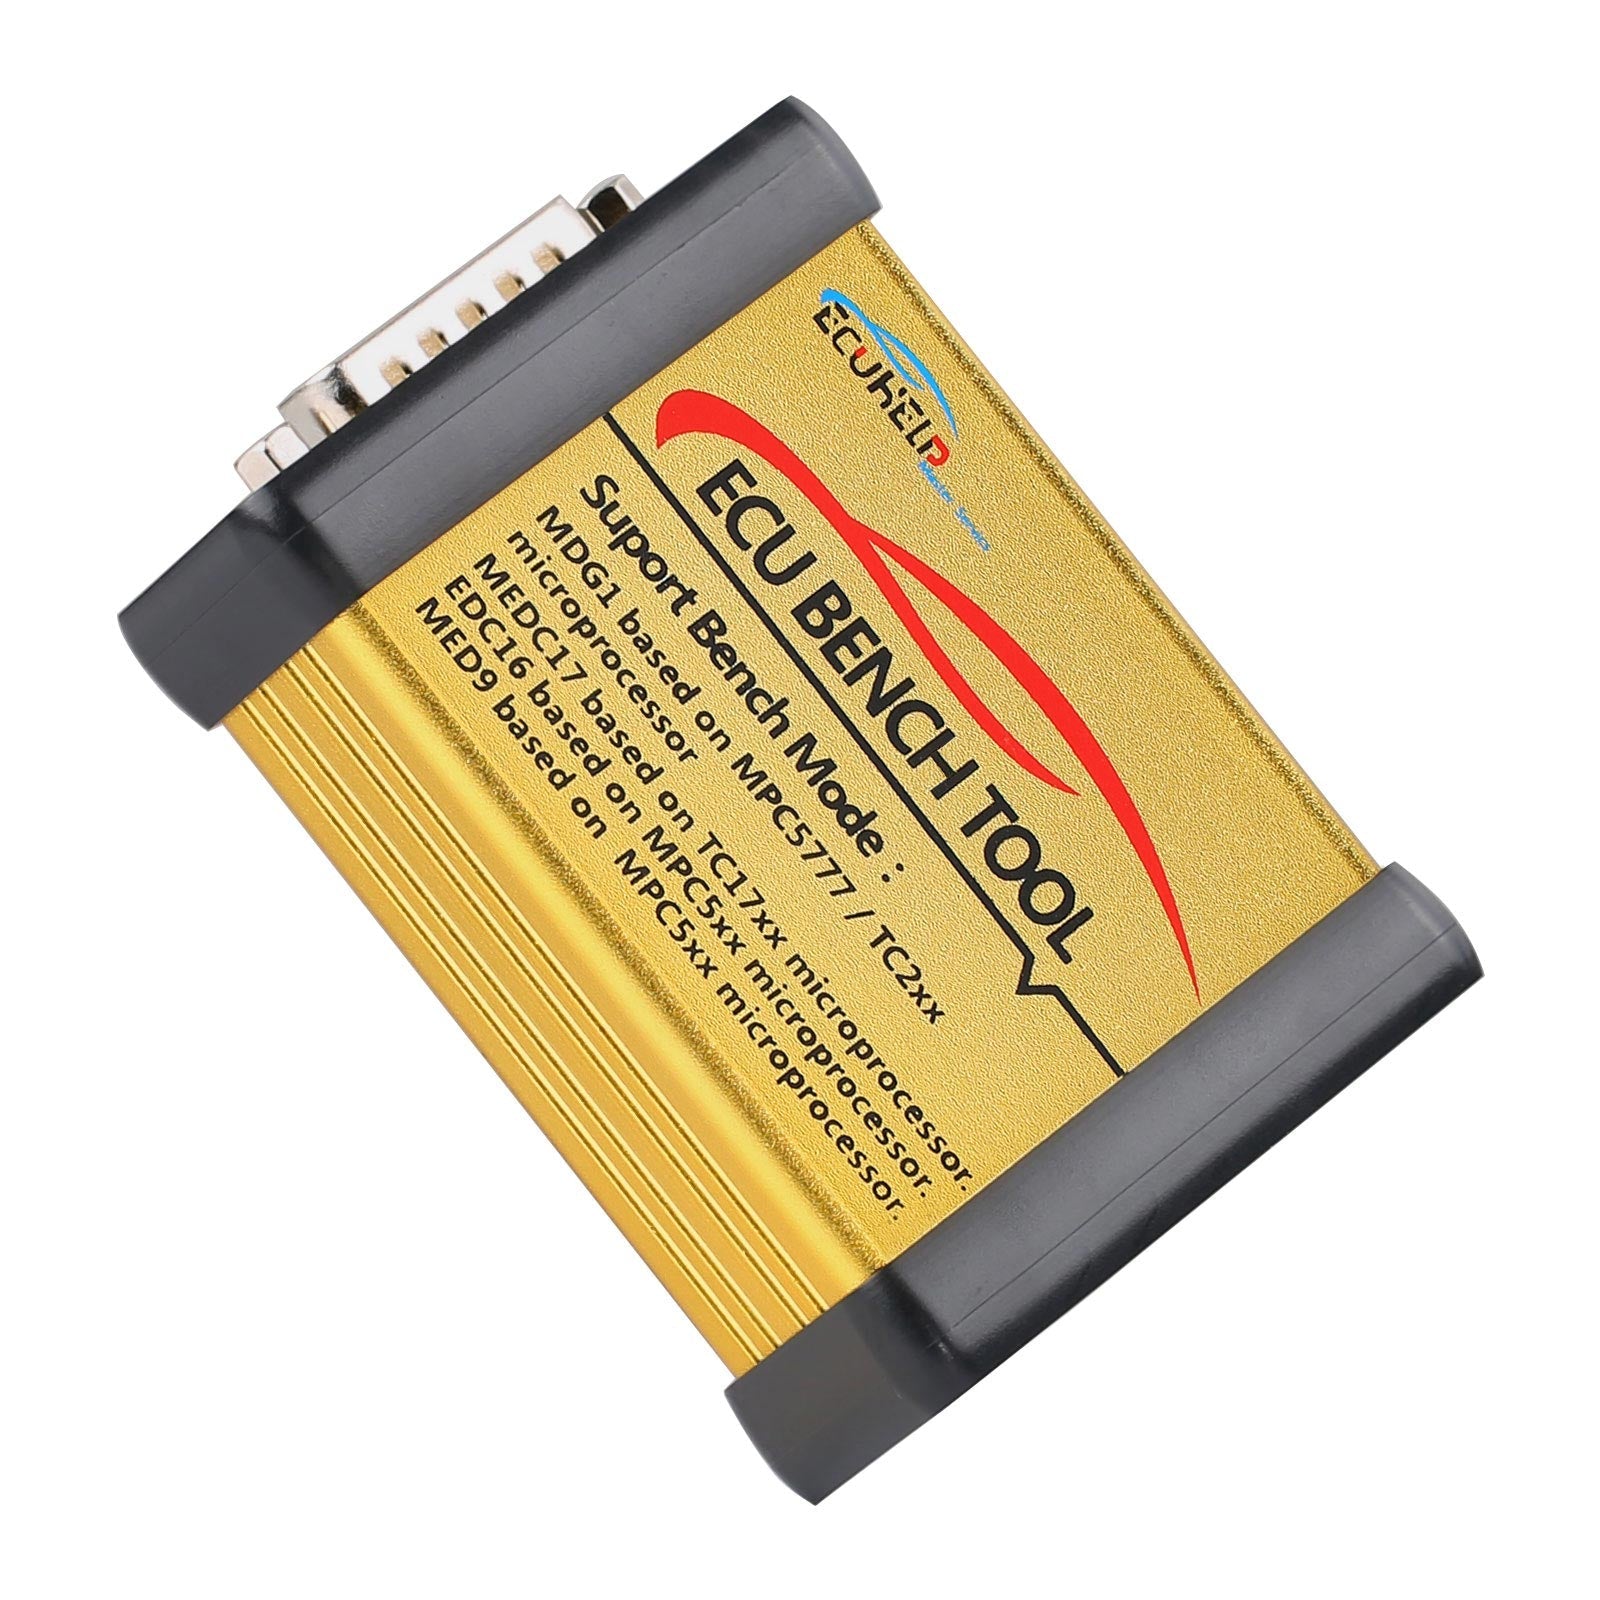 ECU Bench Tool Full Version with License Supports MD1 MG1 EDC16 MED9 ECU Free Update Online